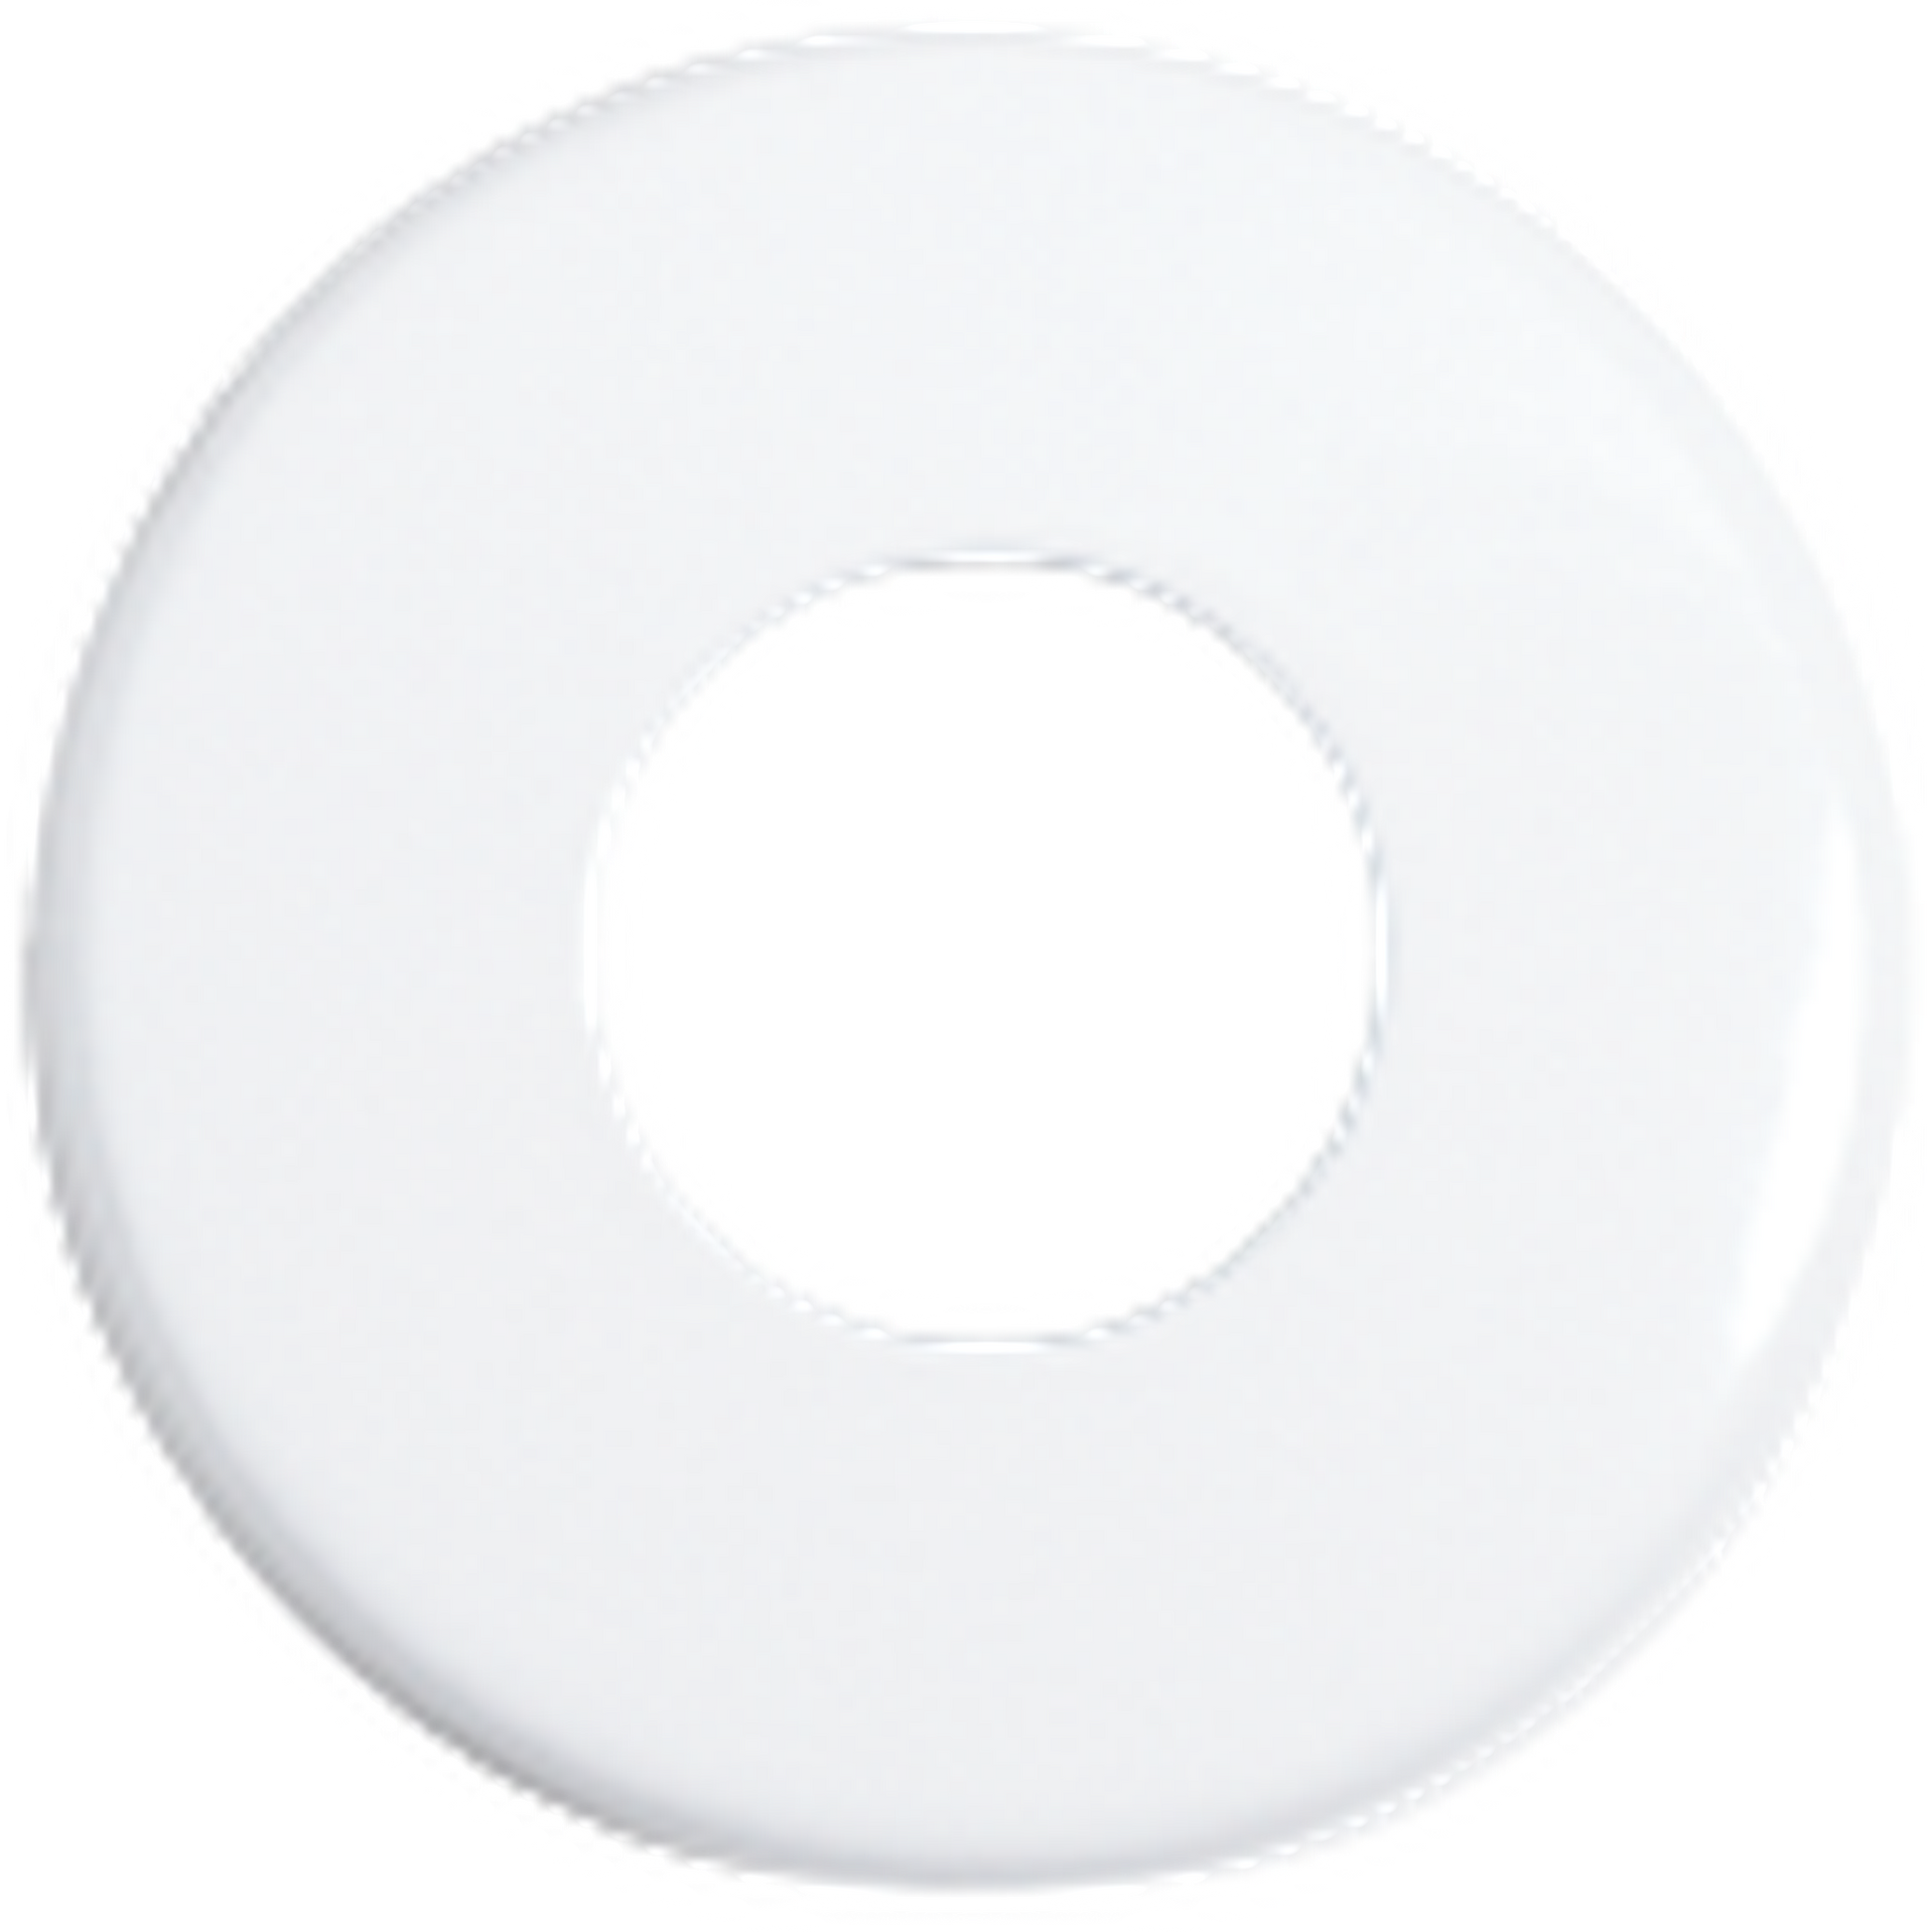 Seachrome Conorado Series 6" White Powder Coat Concealed Mounting Flange Towel Ring